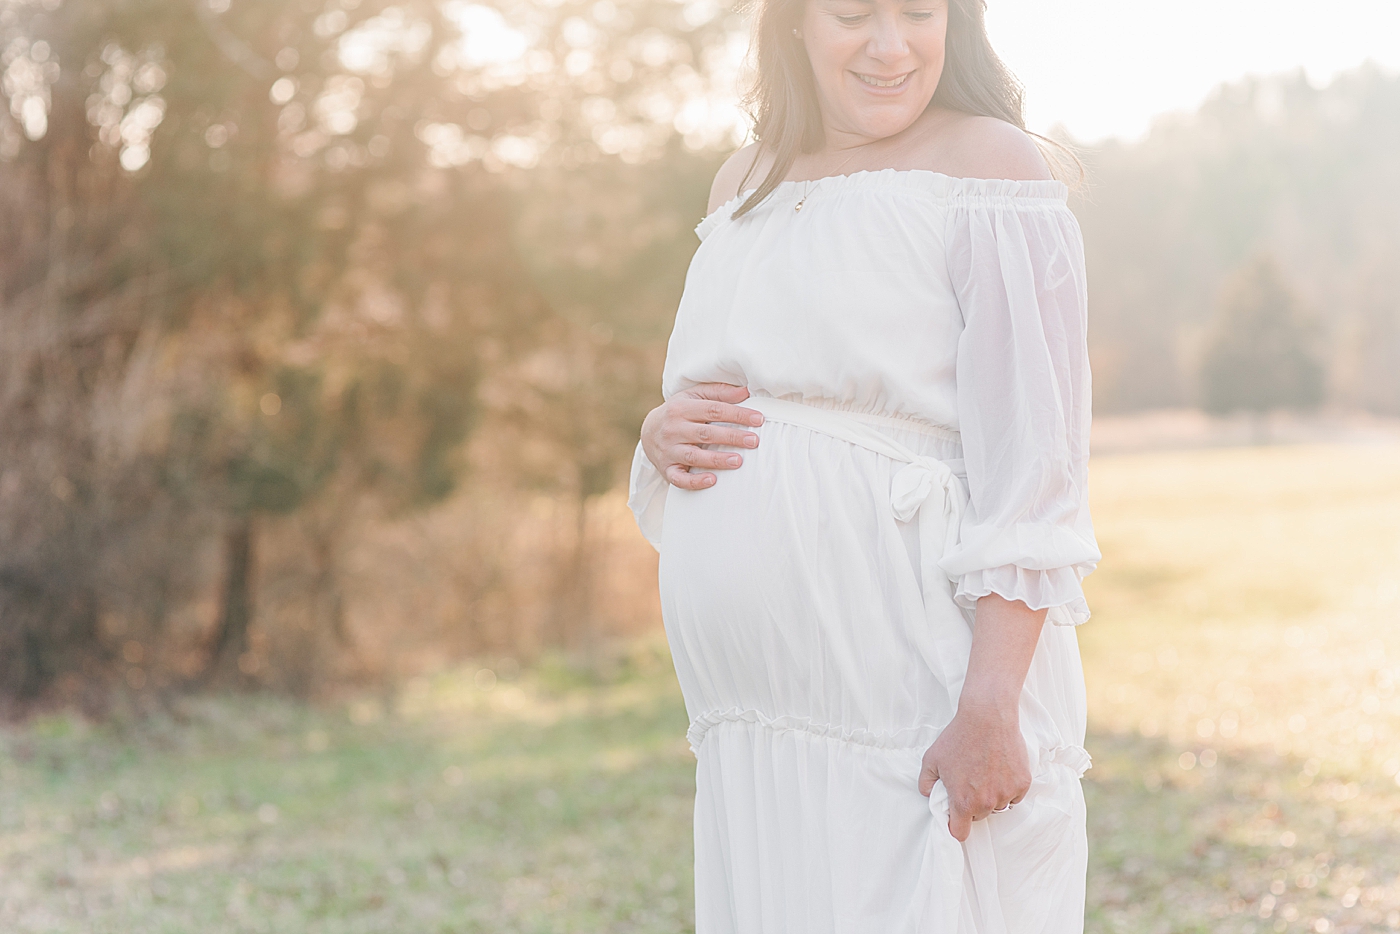 Pregnant woman in white dress in a field at sunset maternity session | Photo by Anna Wisjo Photography